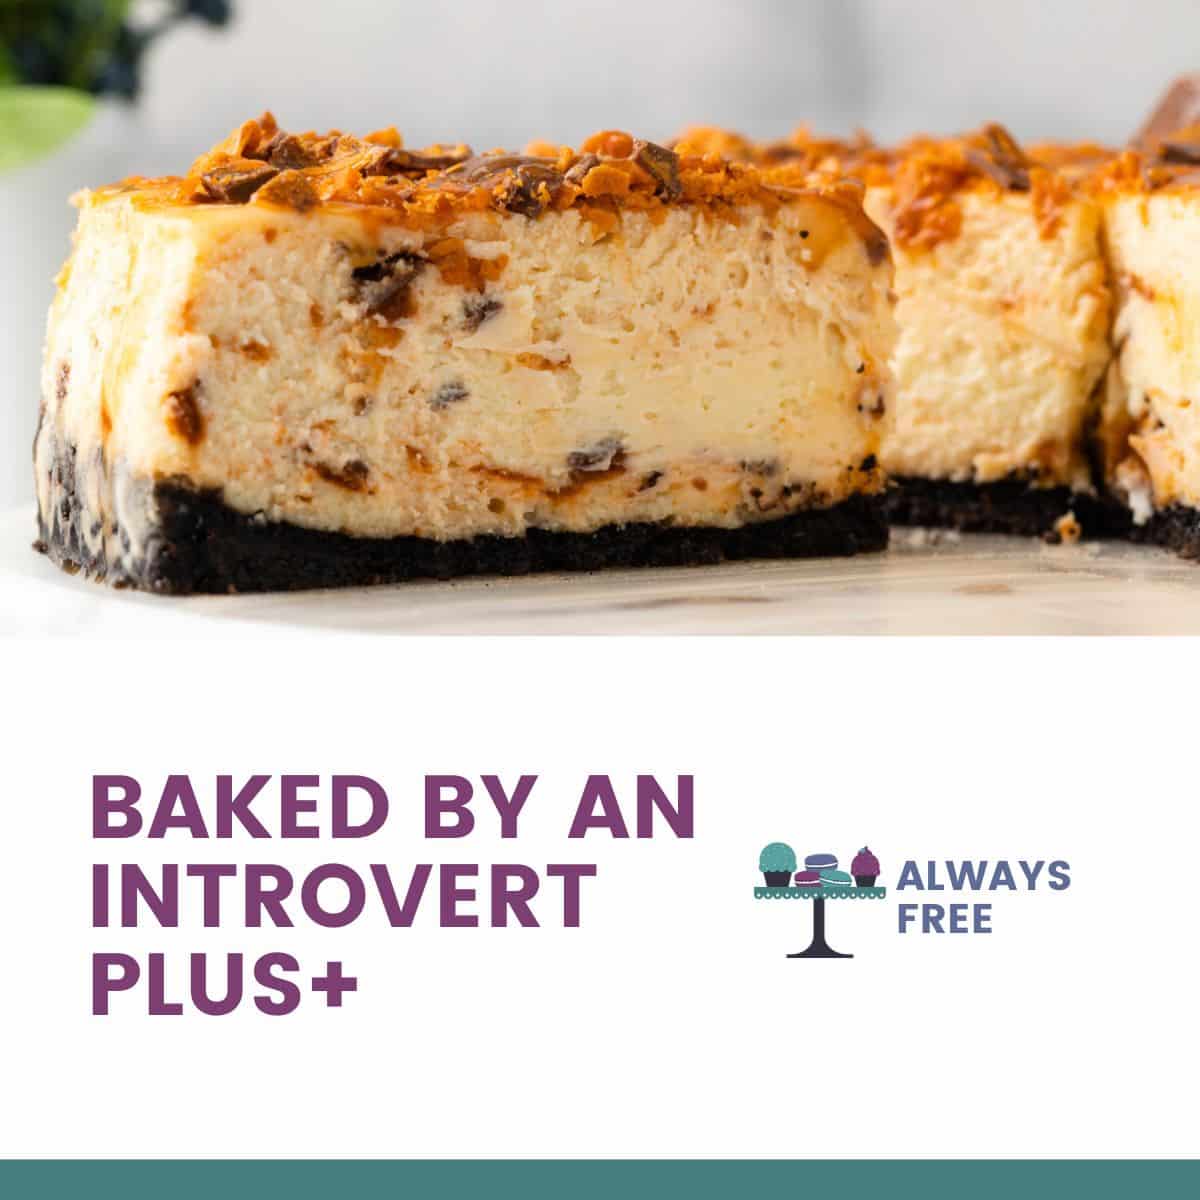 Baked By An Introvert Plus+